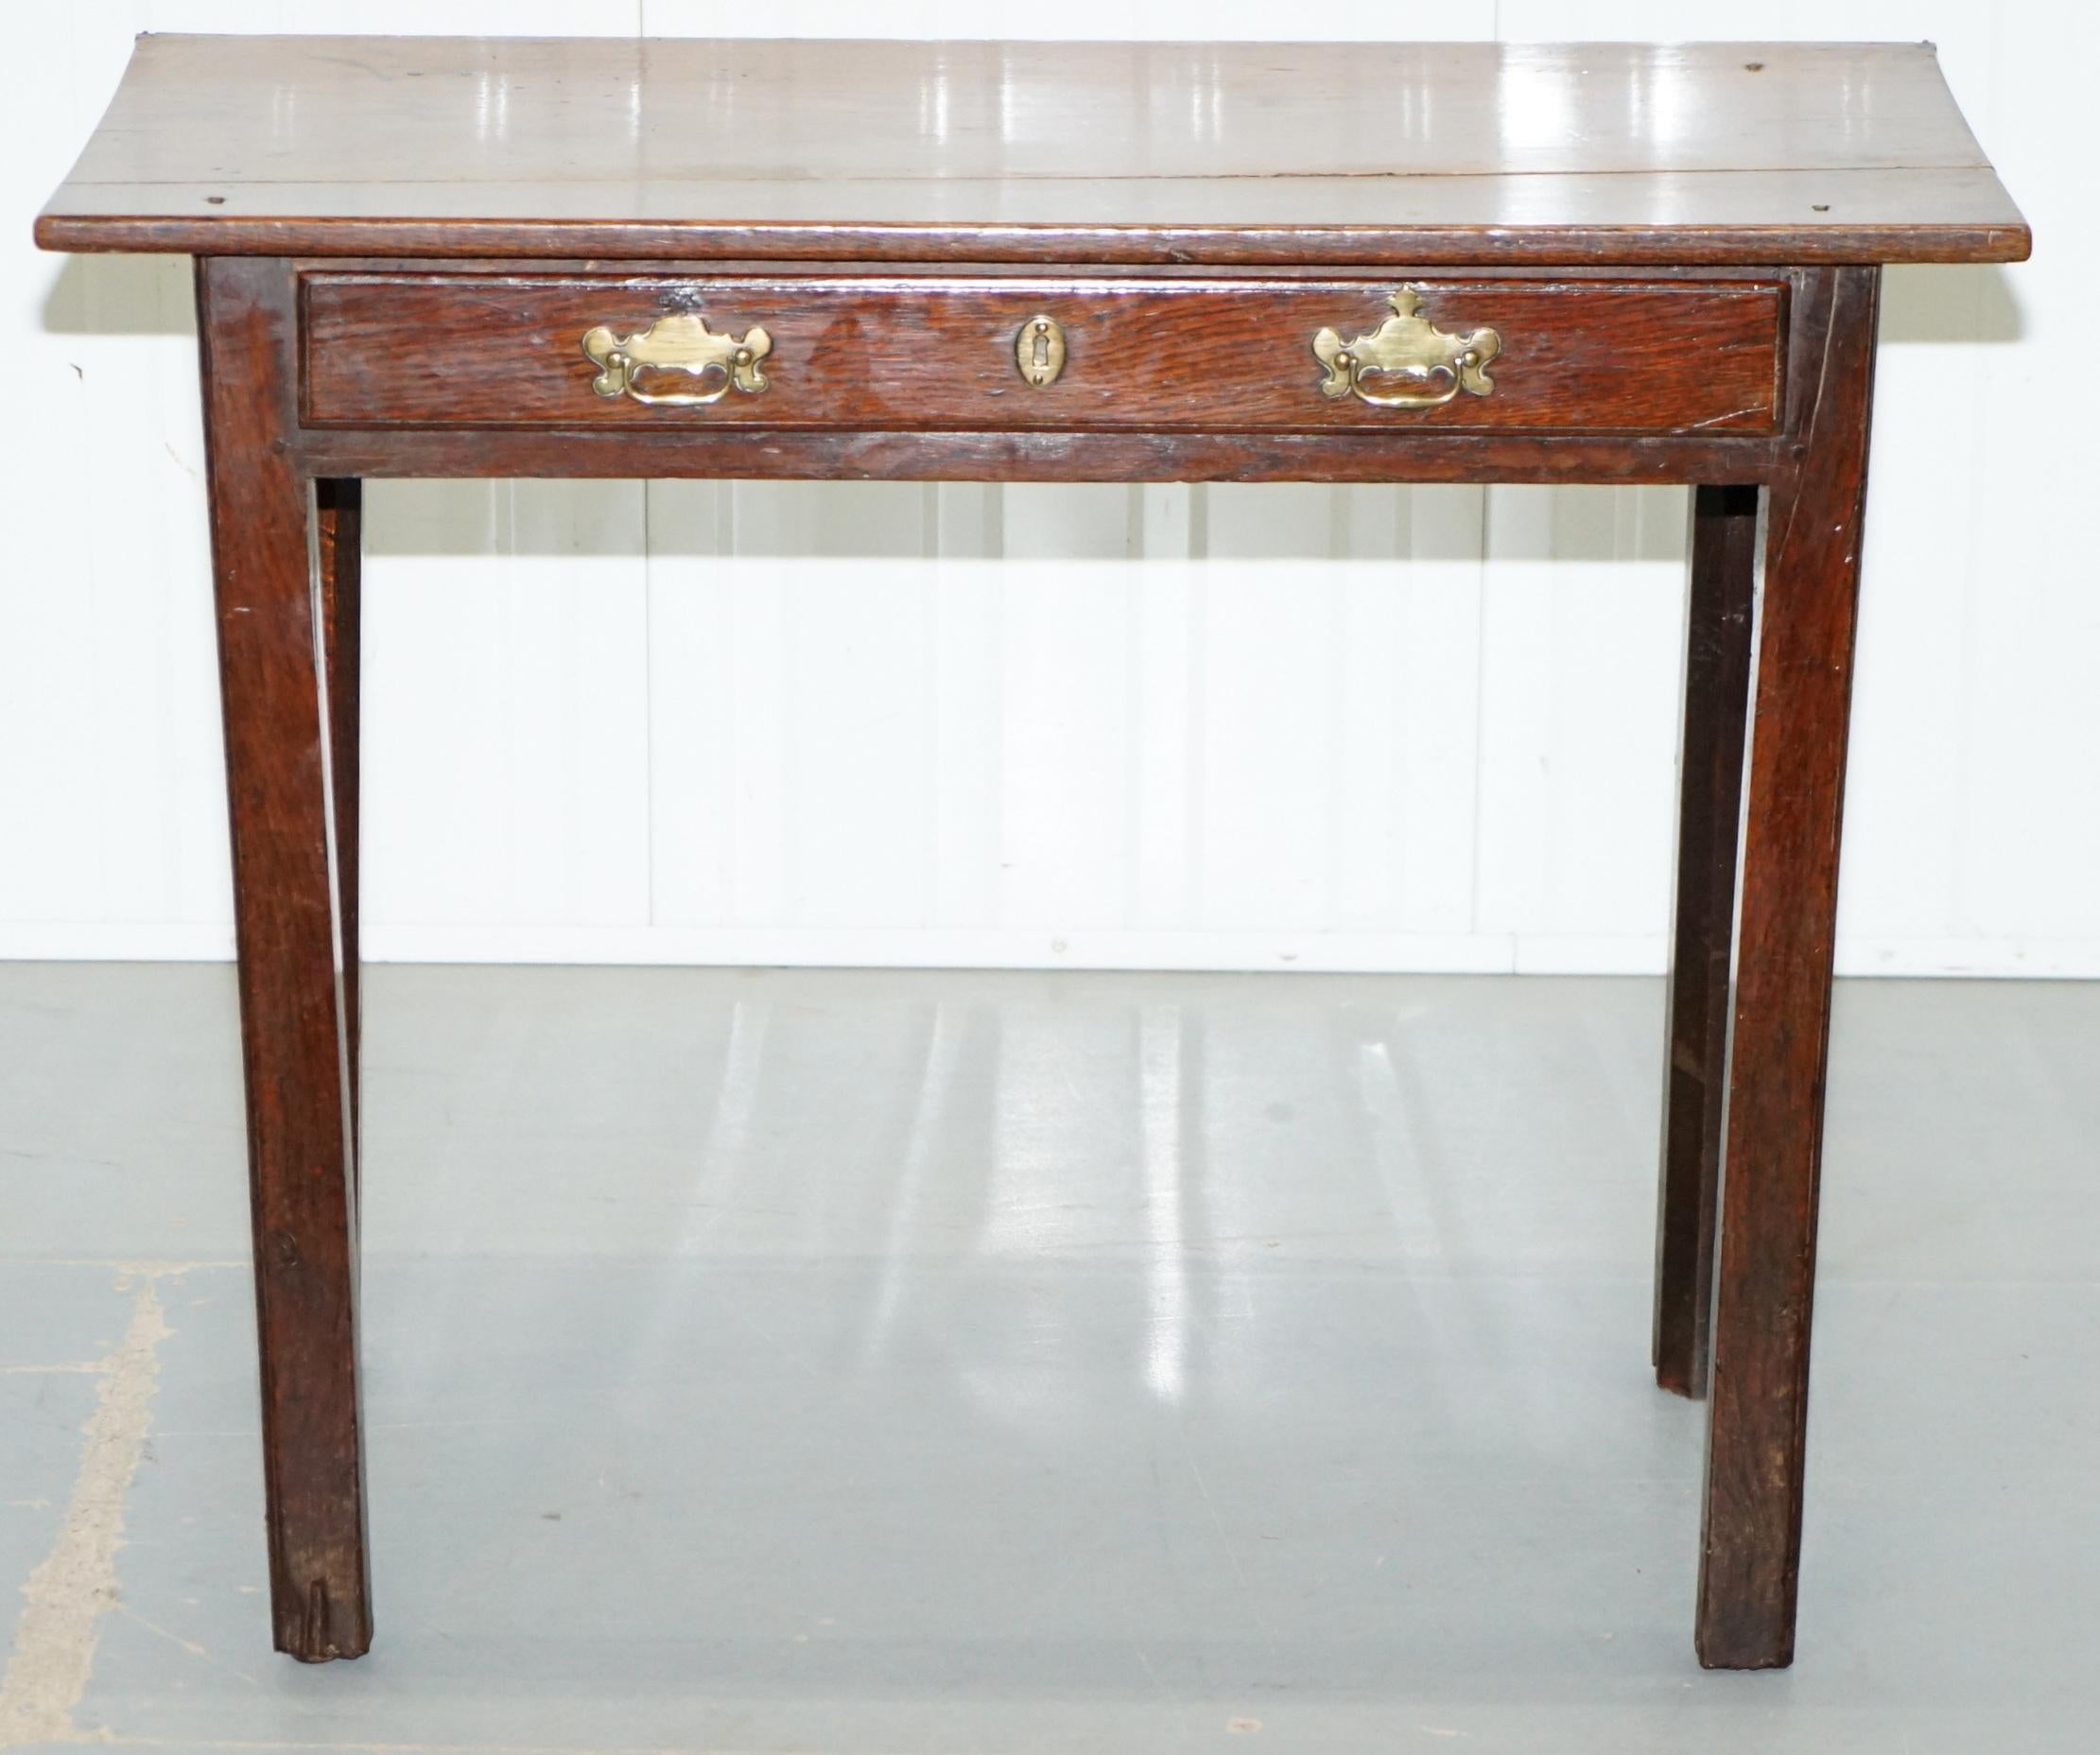 We are delighted to offer for sale this very old early Georgian side games table for restoration 

This piece came to me as a console table when in fact it’s a Georgian games table in need of restoration to bring it back to a games table, if you